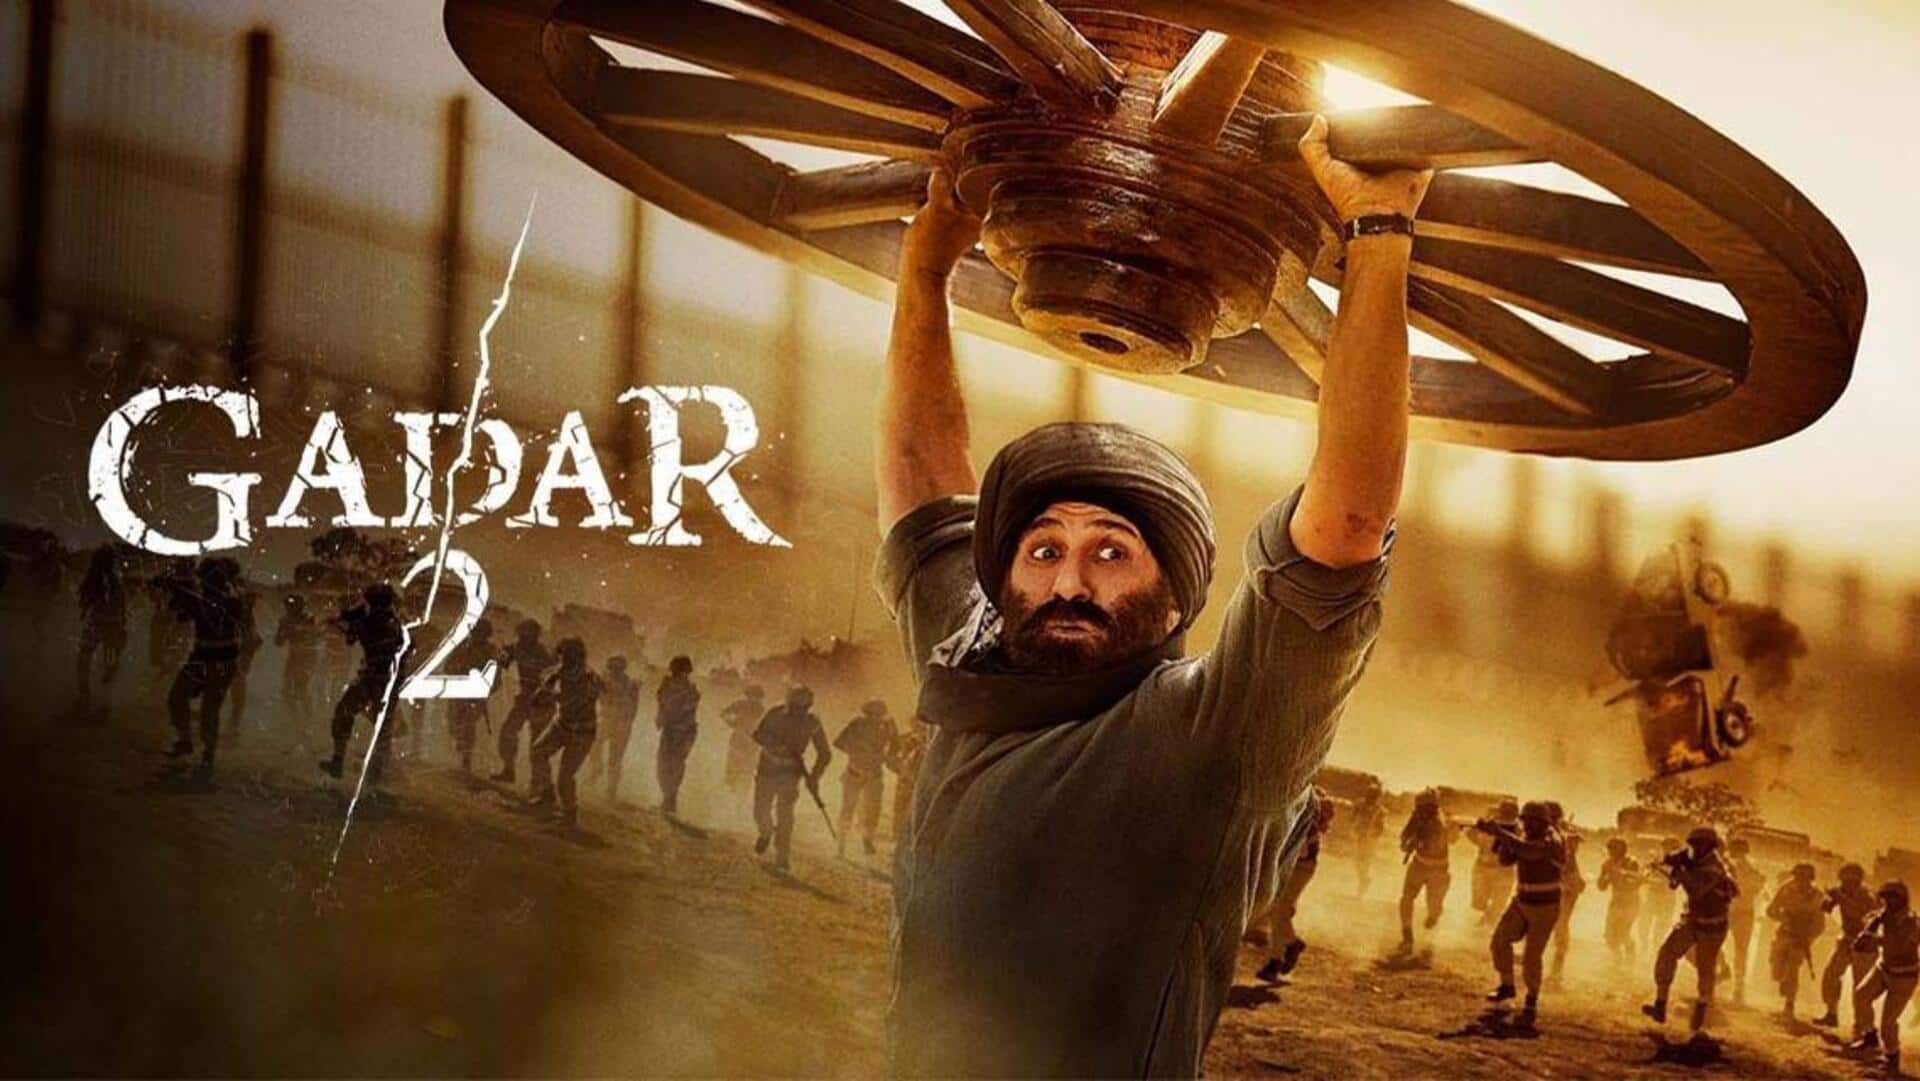 Box office collection: 'Gadar 2' is resilient and seeking momentum